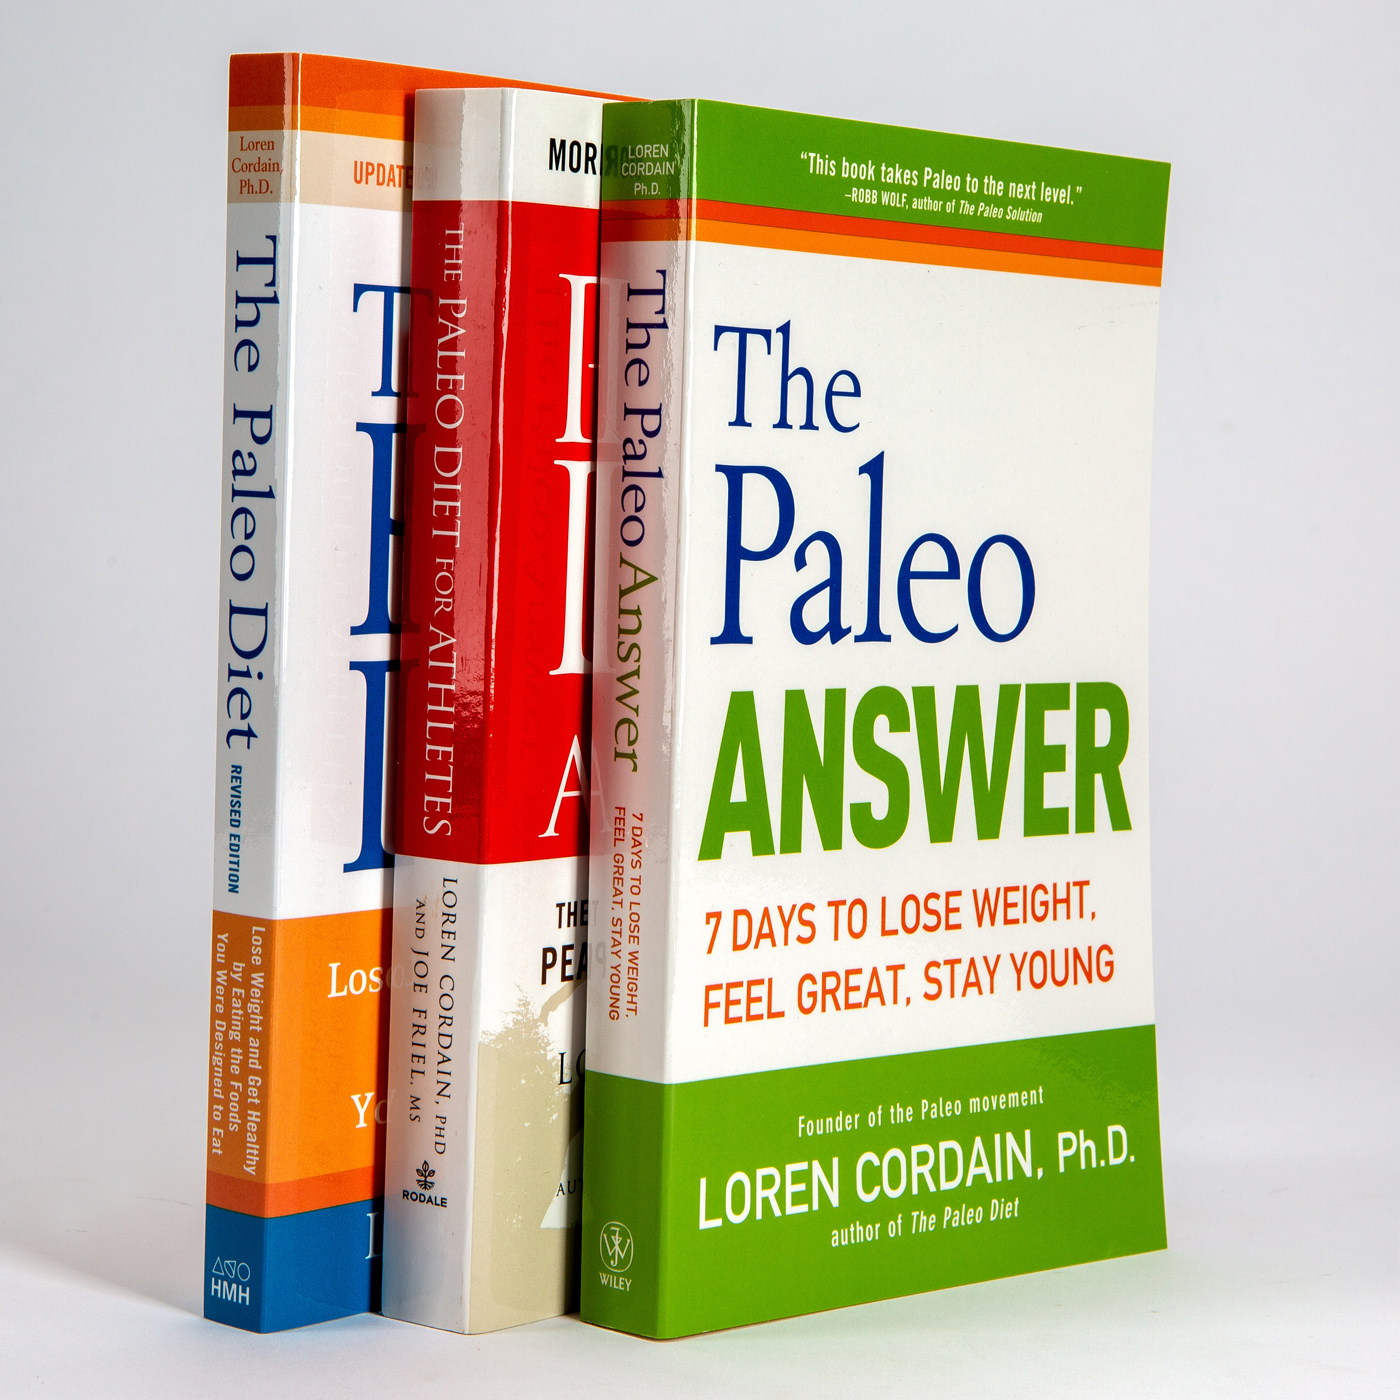 Photo of The Paleo Answer book